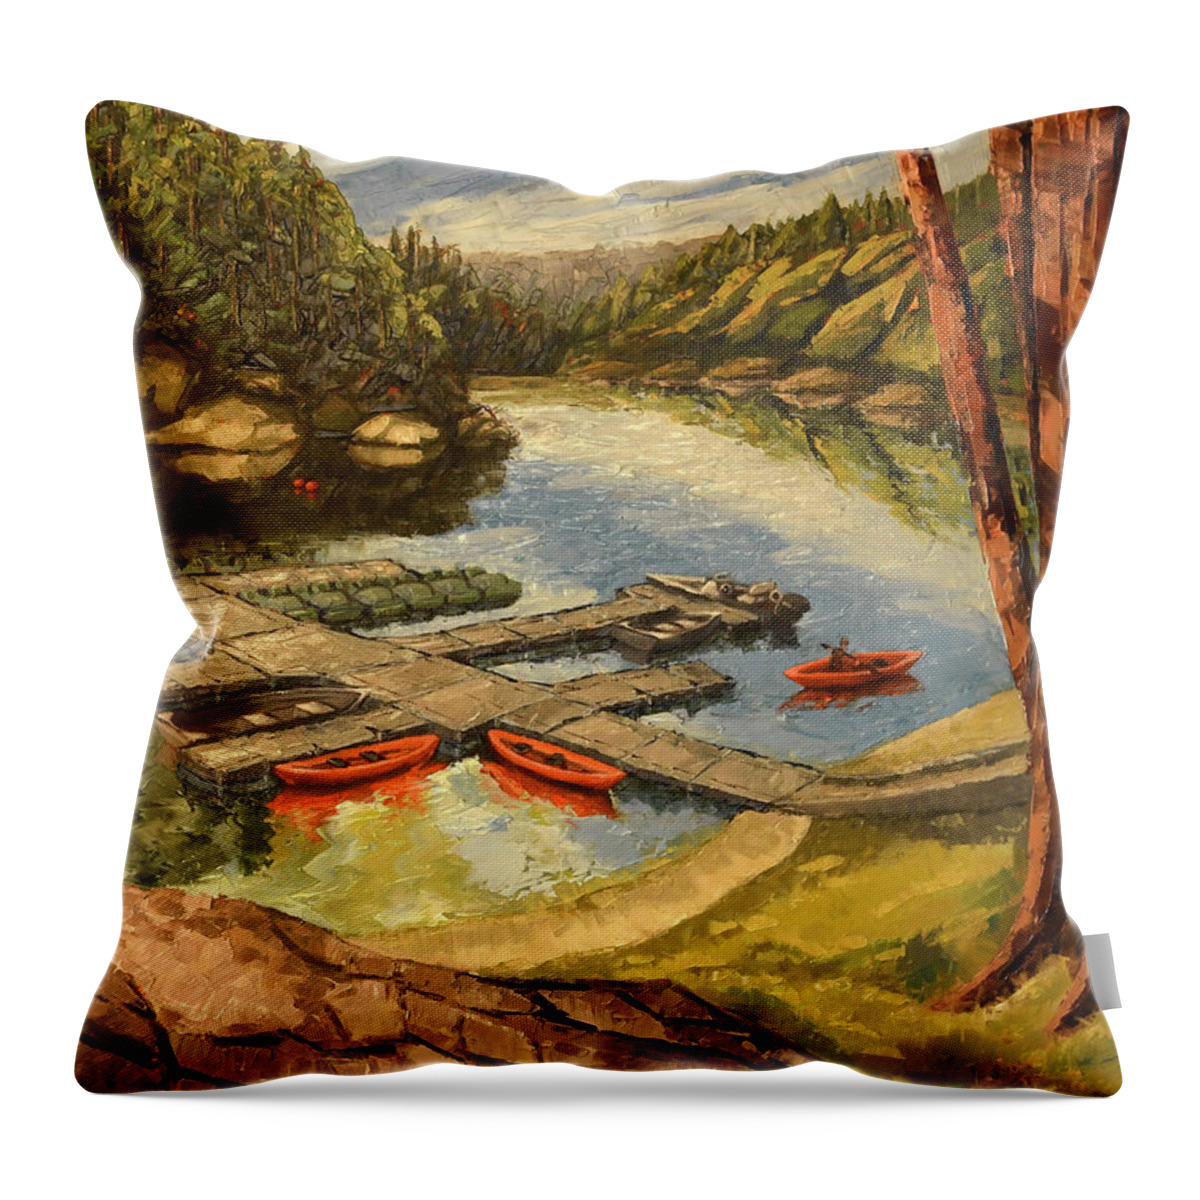 Loch Lomond Throw Pillow featuring the painting The Loch by PJ Kirk